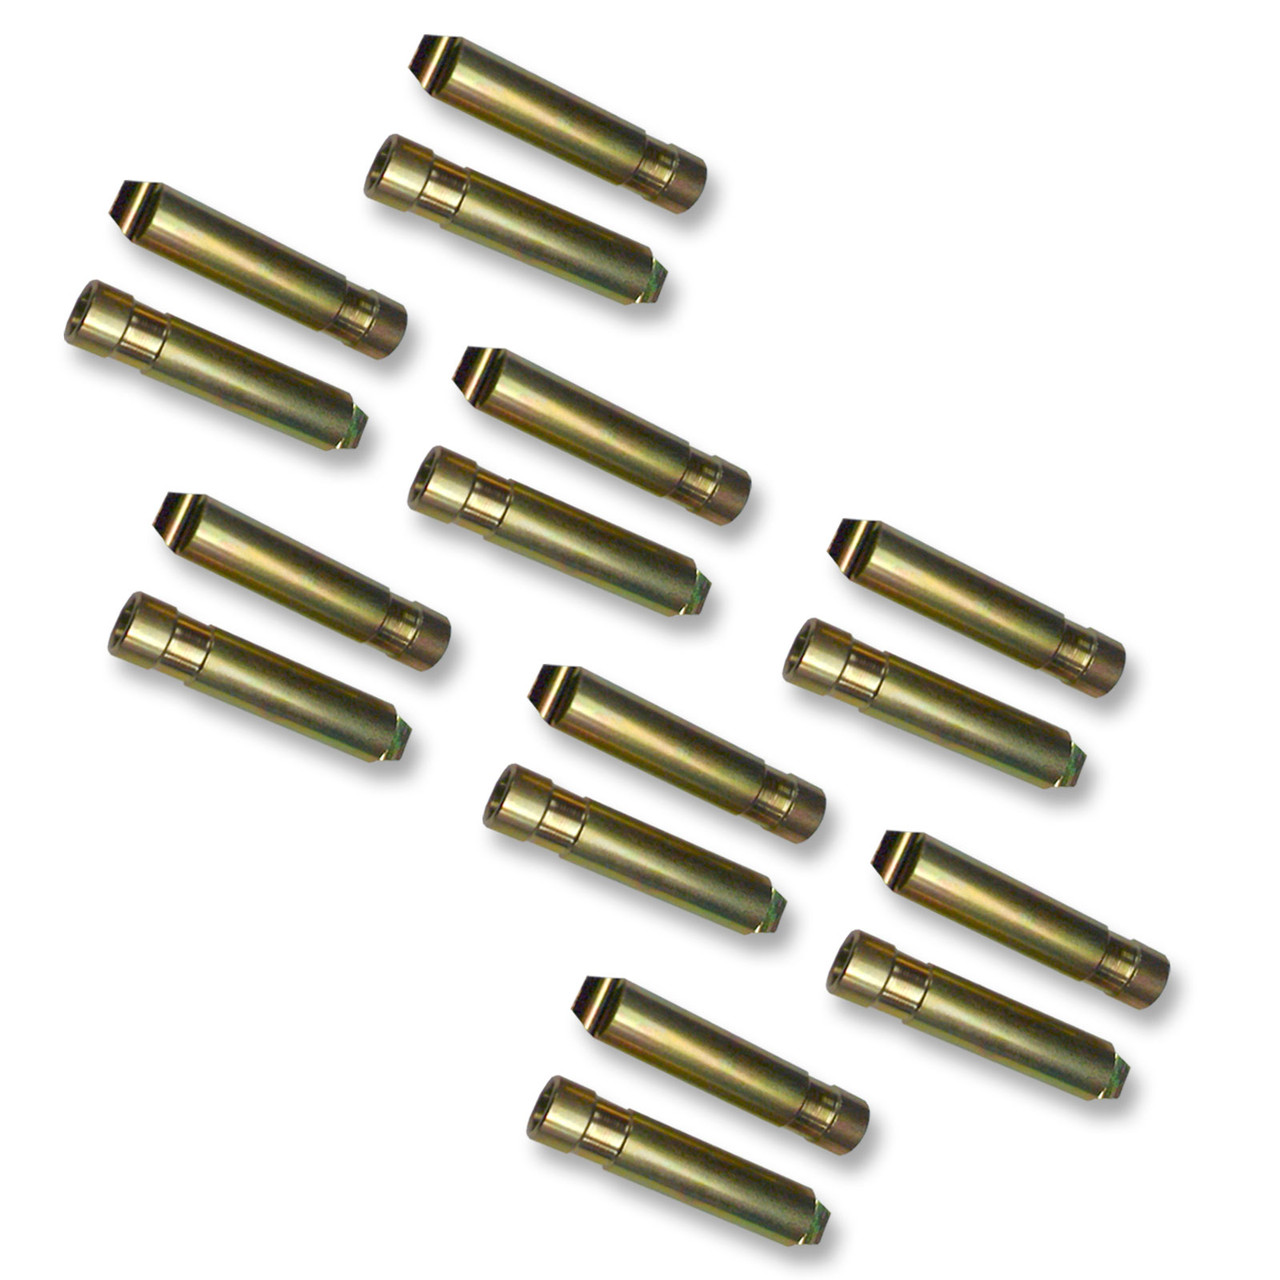 WC562EXT - 3" Stud Extender for Alignment Wheel Clamp Adaptors - Set of 16 | McBay Performance